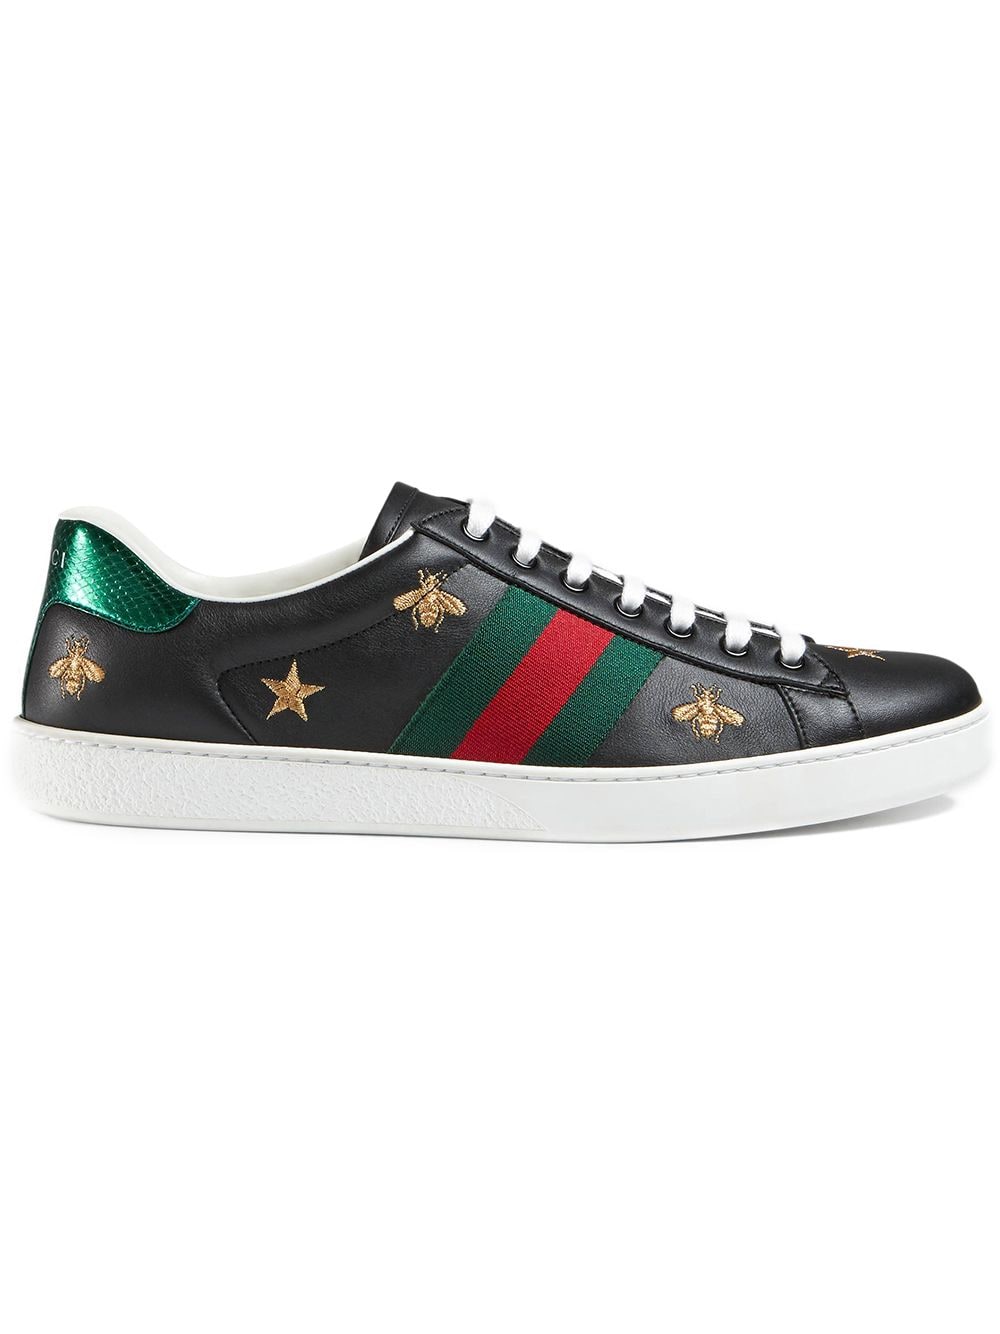 gucci embroidered sneaker